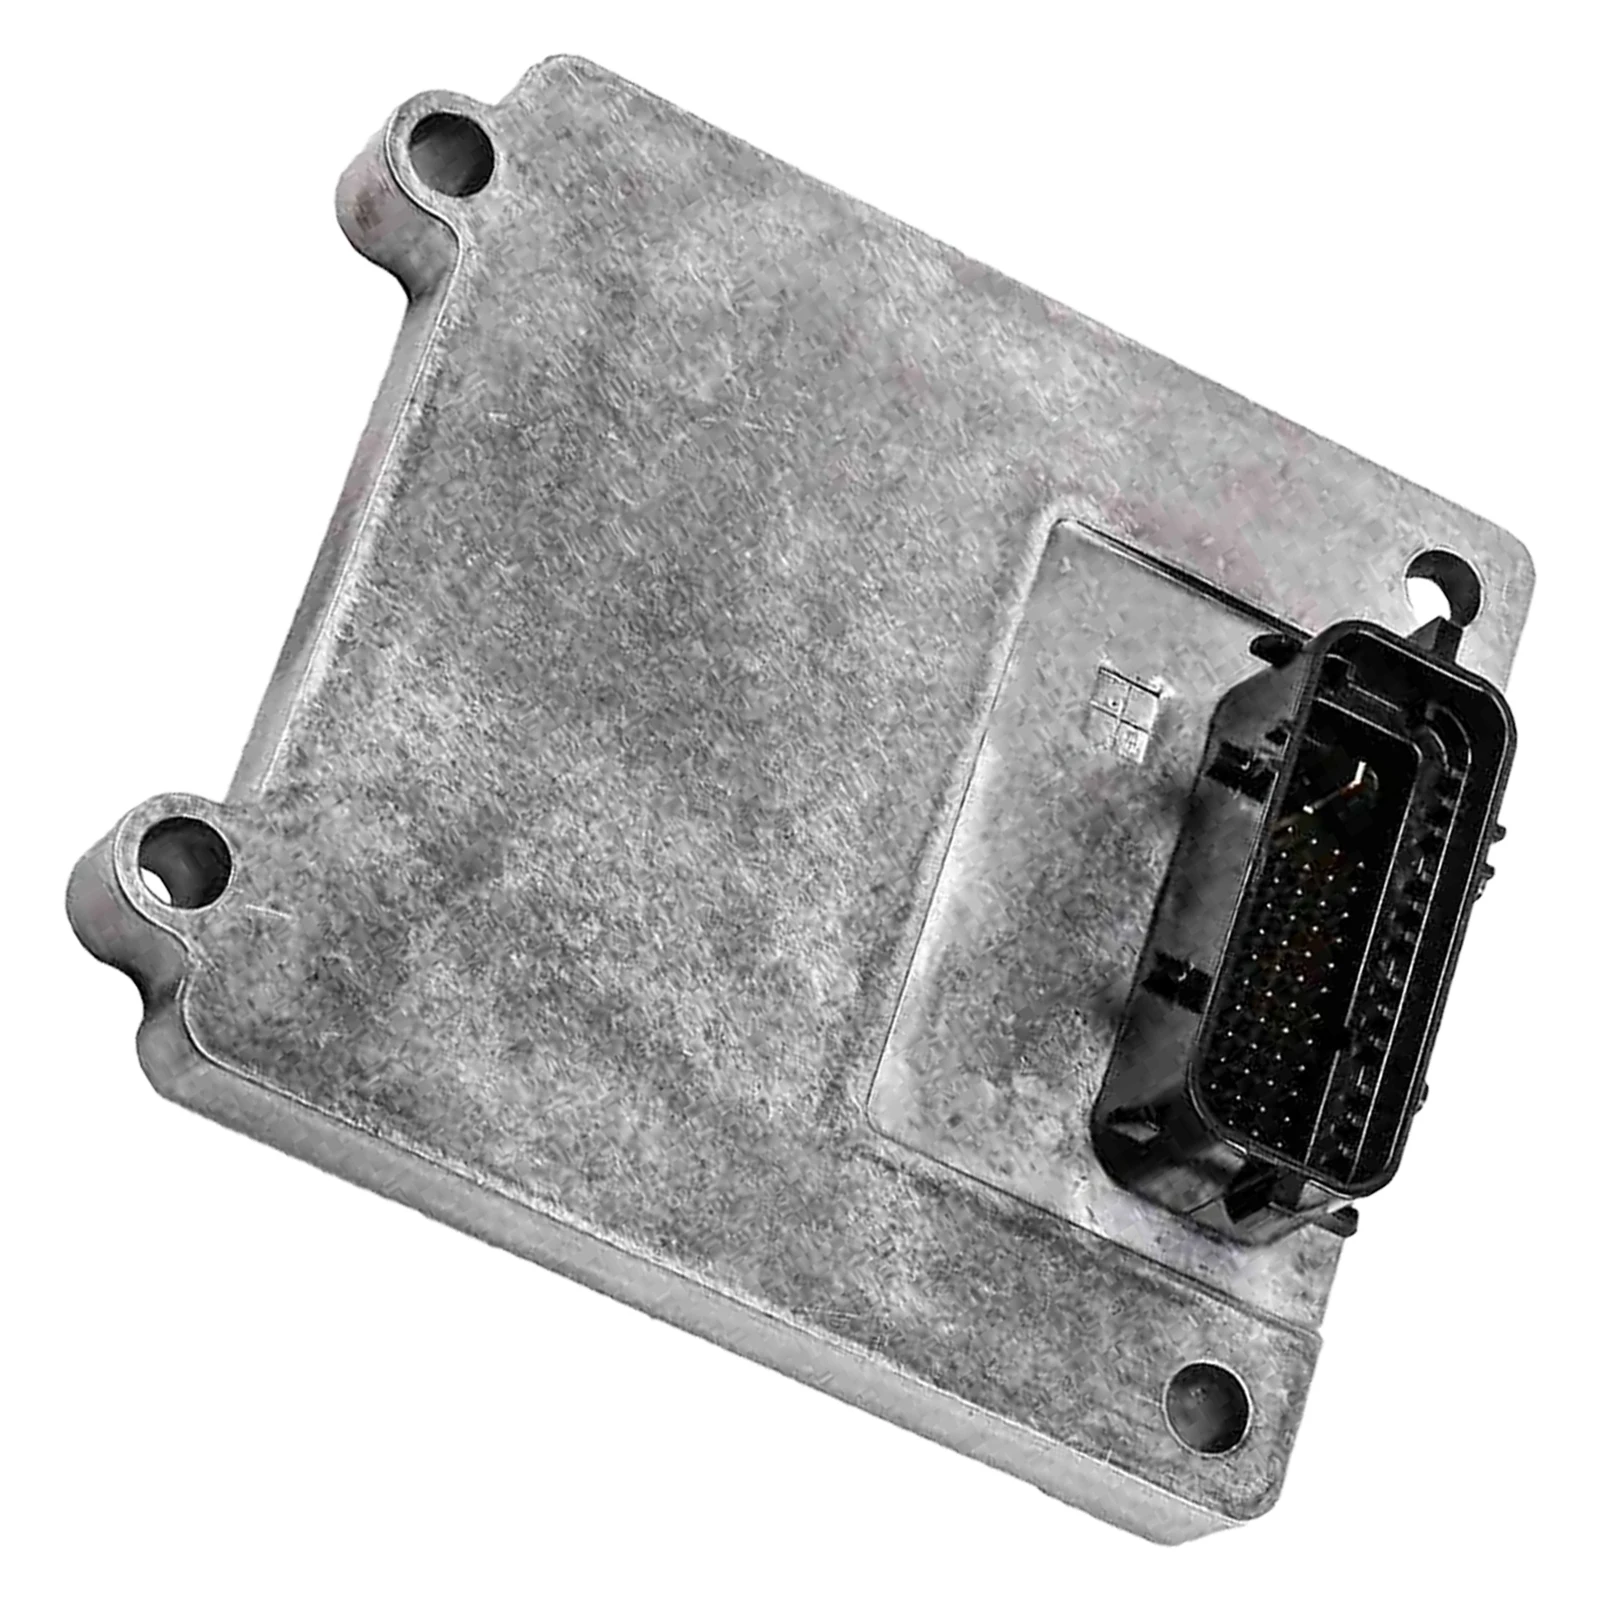 Transmission Control Module 2423450 24252114 24242391 Replacement suitable for 2005-2014